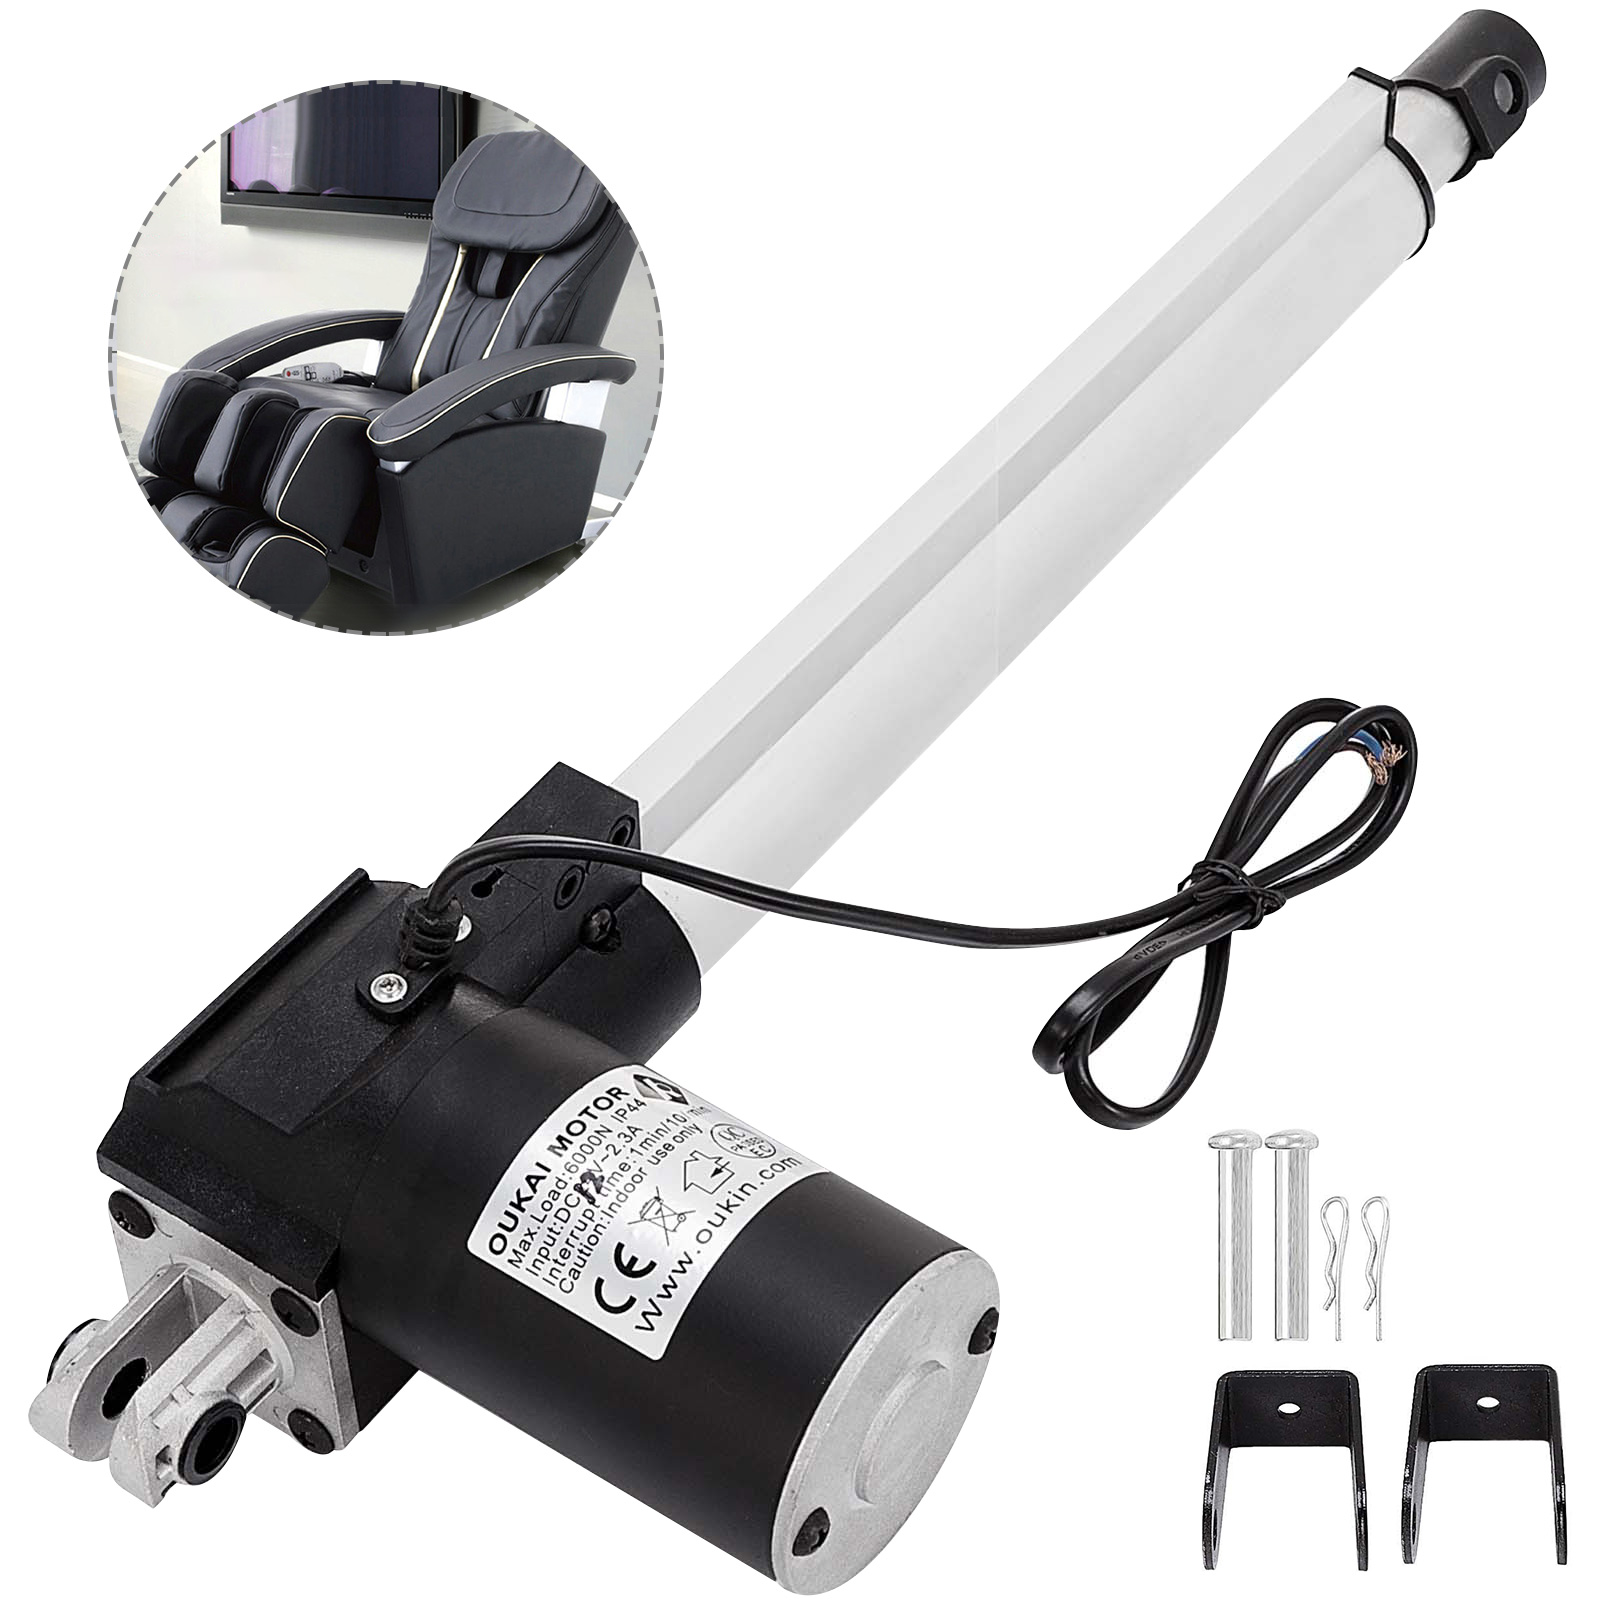 10" 12V Multi-function Linear Actuator Heavy Duty 1500N DC Motor &Remote Control 